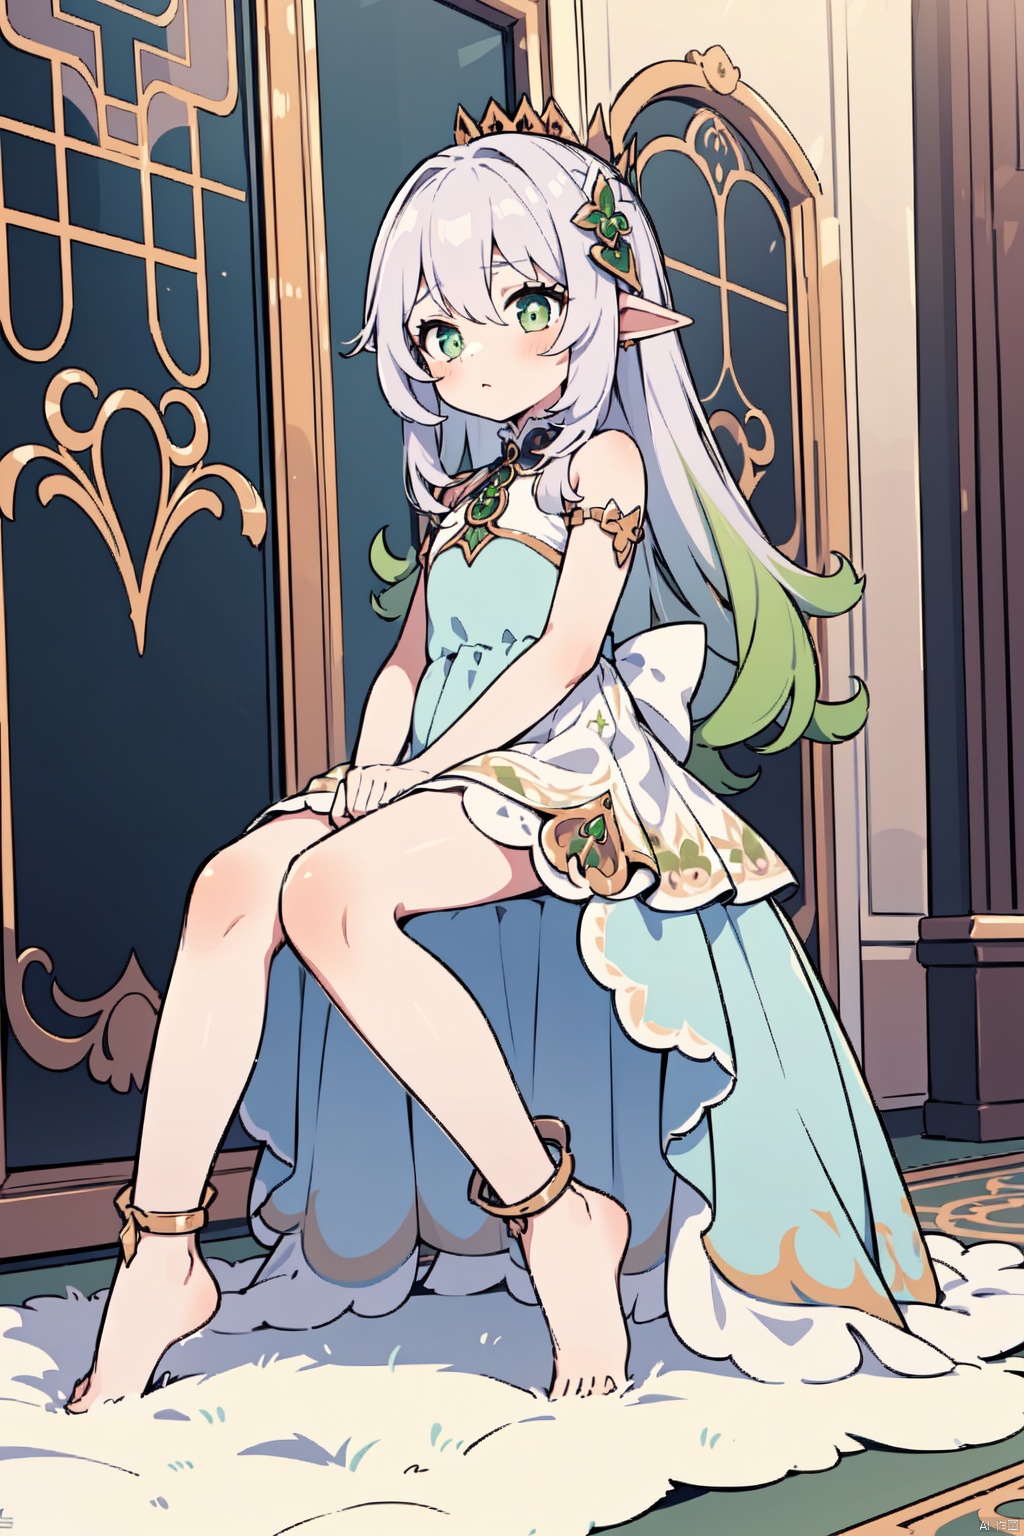  1girl, solo, nahida,blue queen dress,royalty,palace,crown,standing,full_body,serious expression,indoors,golden,(bare_feet),sitting on a throne,luxury dress,long dress,sad,hand on lap,puffy dress,delicate princess dress,noble,no shoes,lace_trim